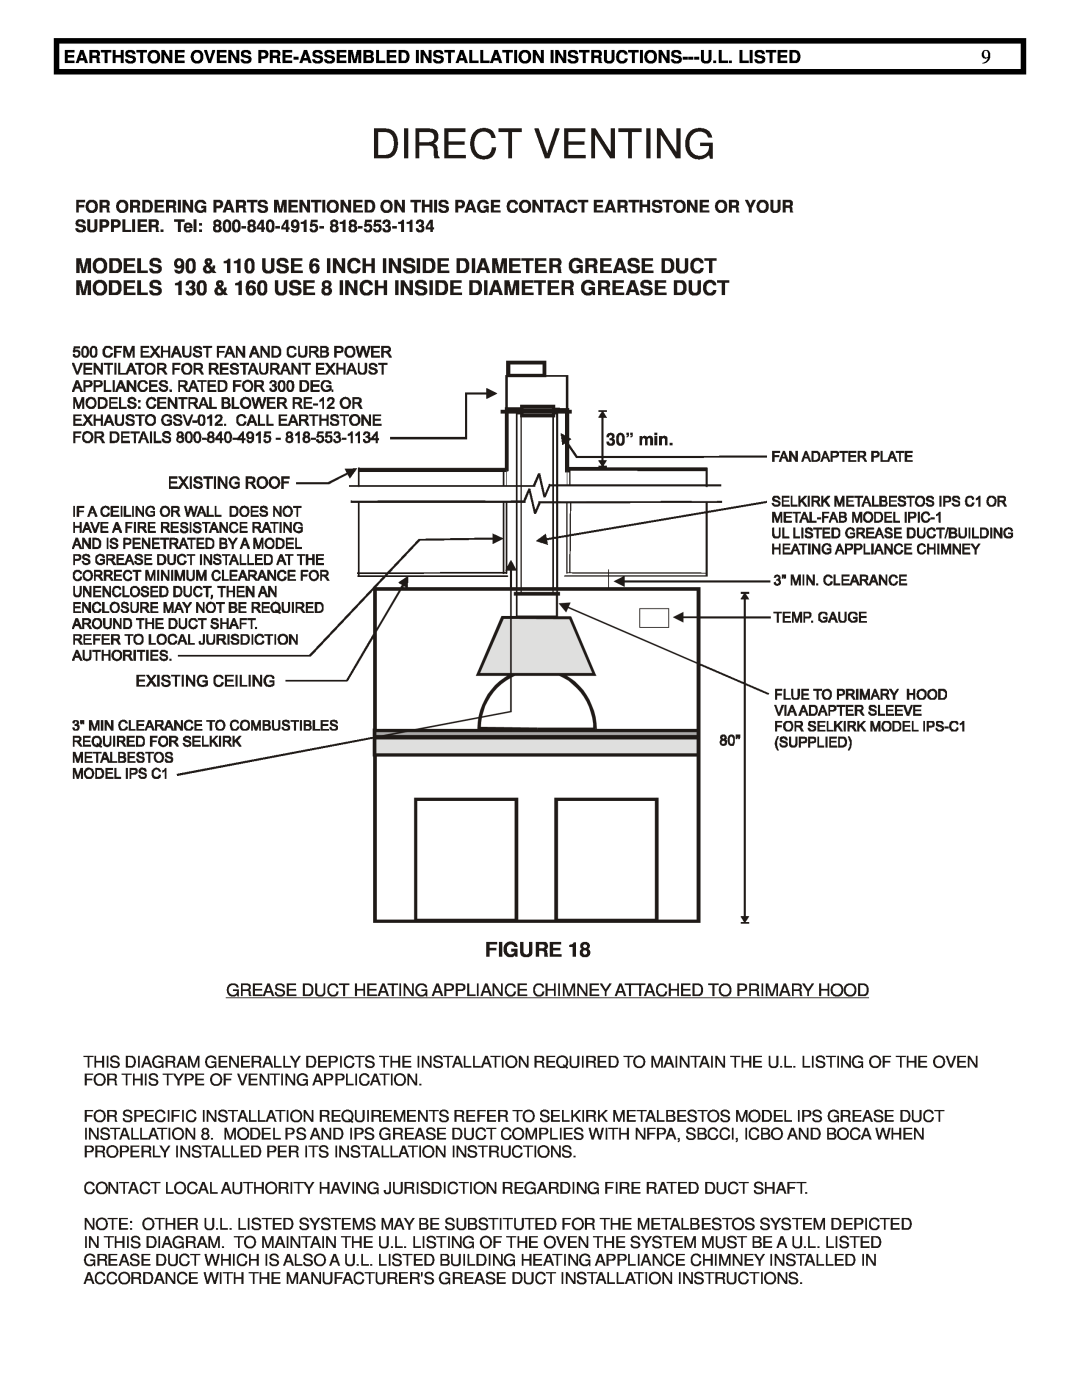 EarthStone woofire oven installation instructions Direct Venting 